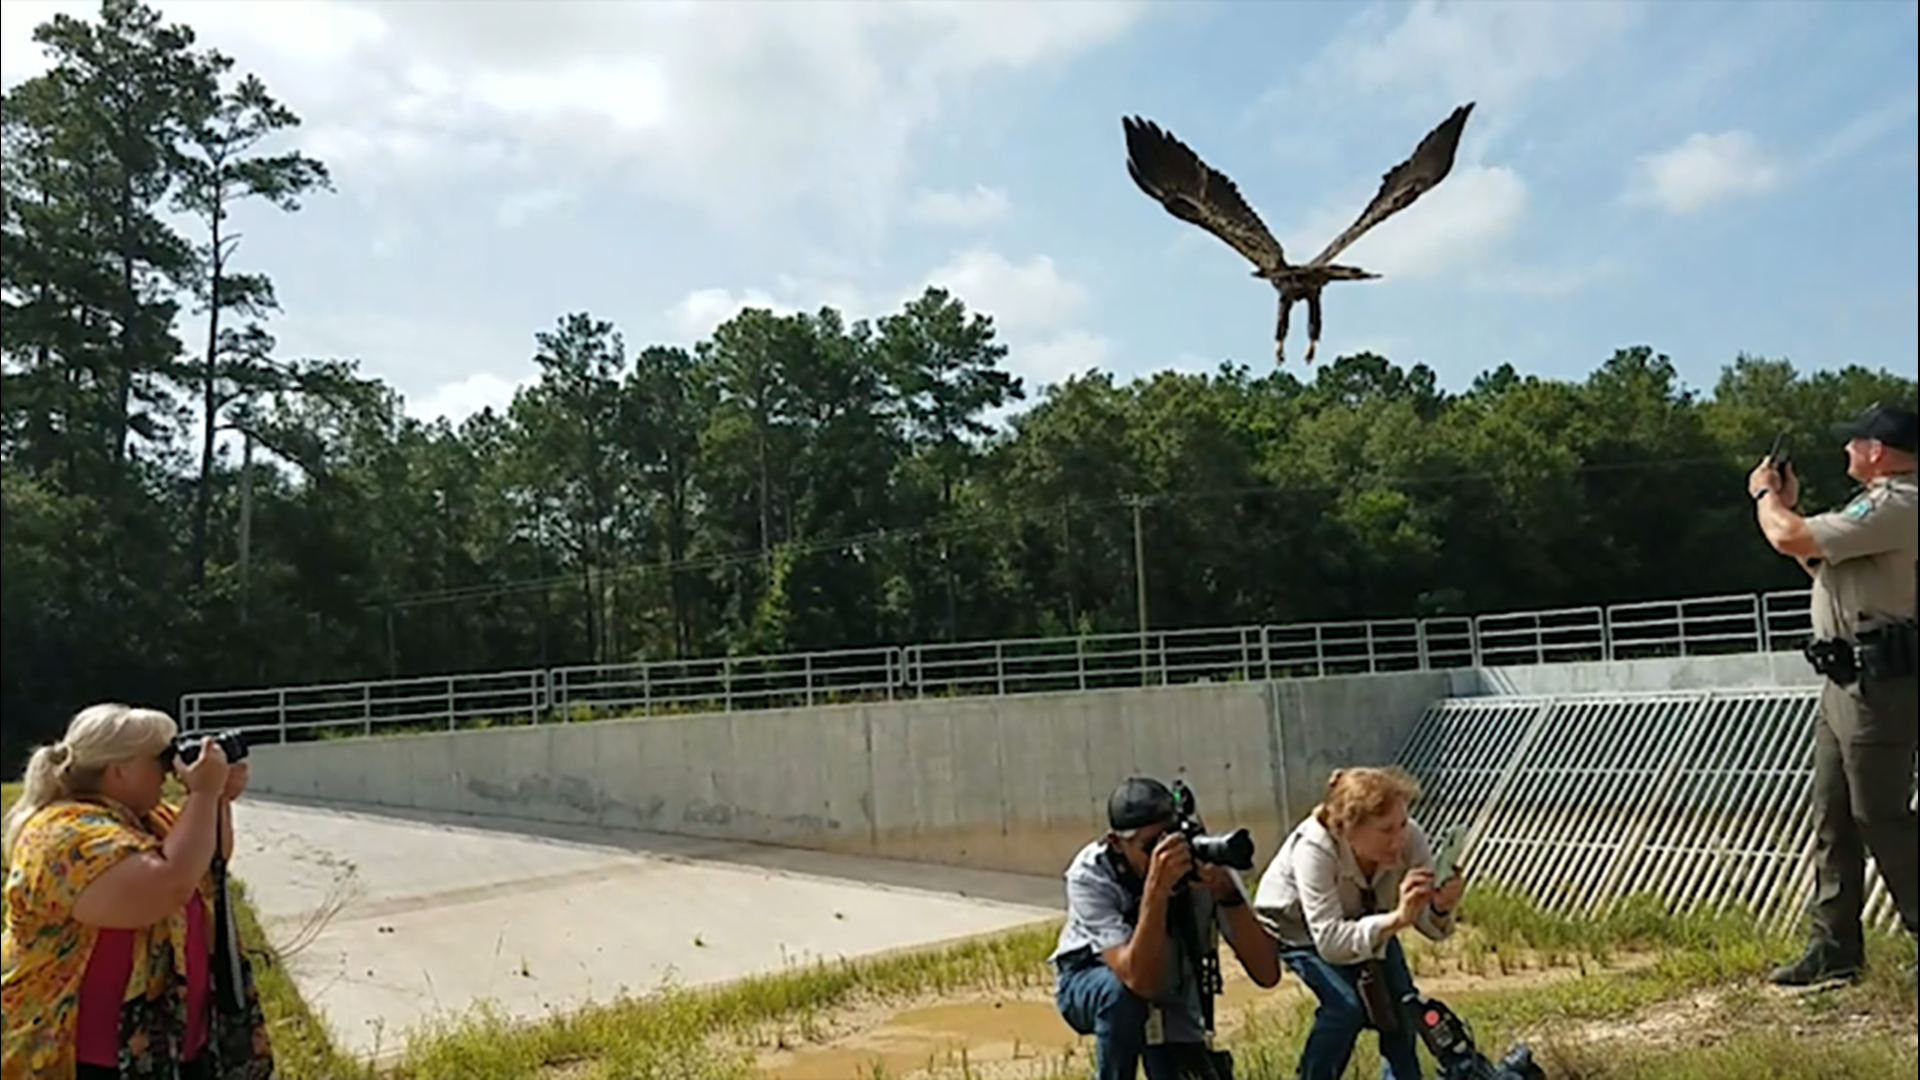 The Houston SPCA’s Wildlife Center of Texas released a juvenile bald eagle back into the wild Sunday. The bird was treated at the center since May.